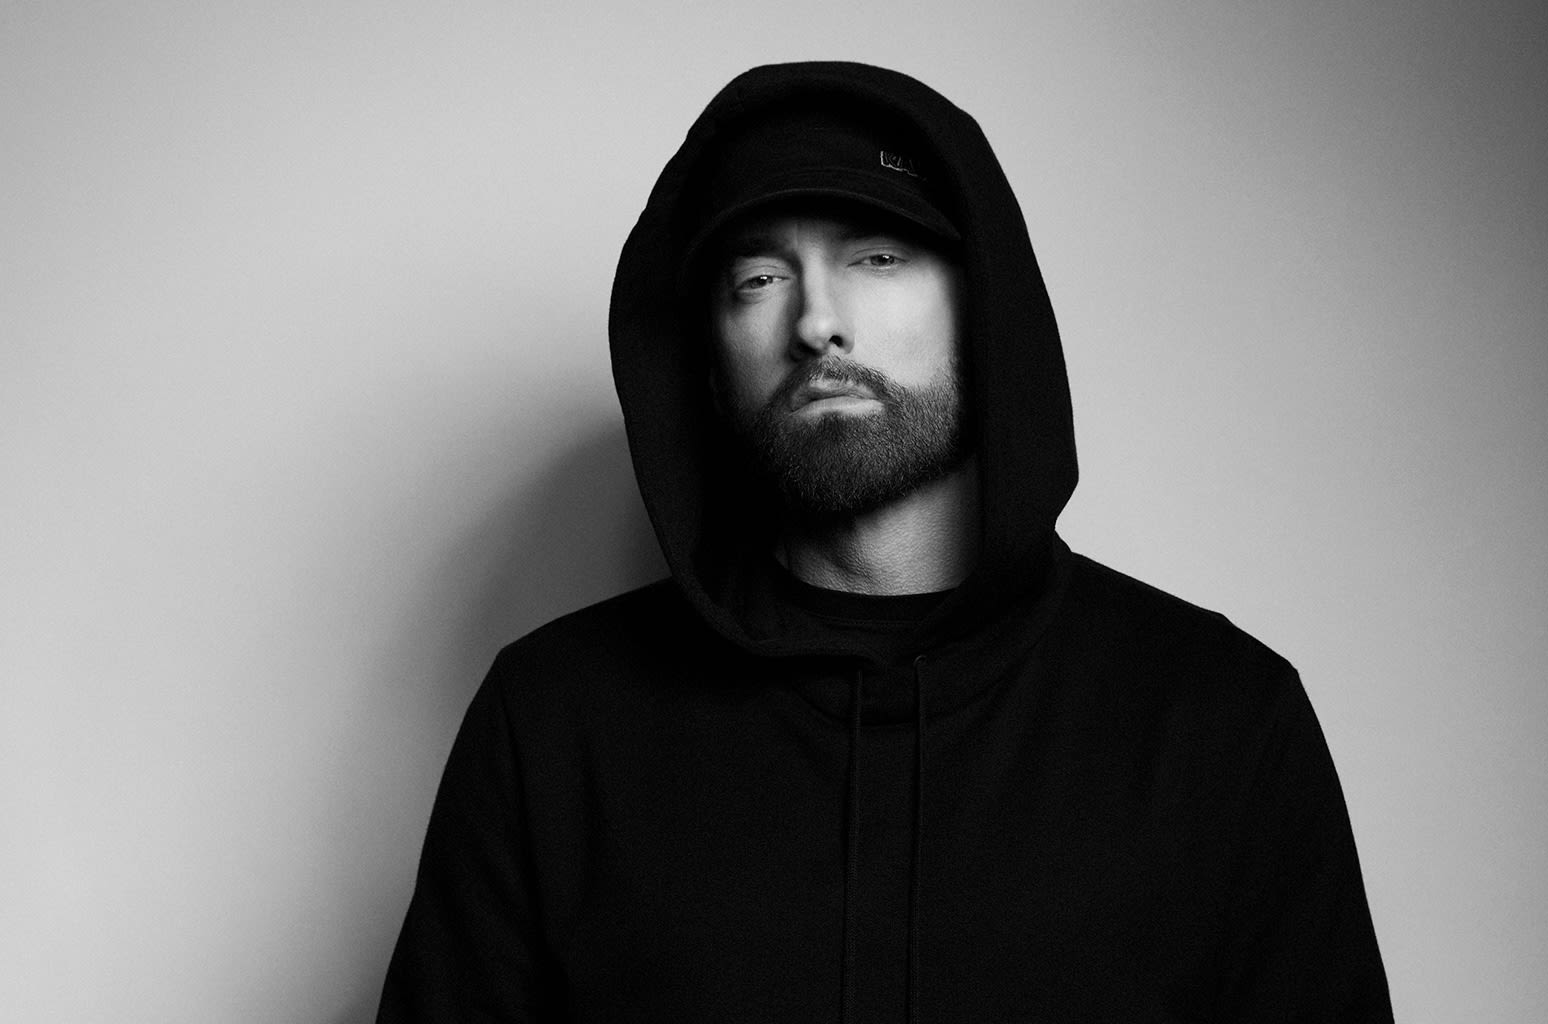 Eminem Brings Out the Body Bag to Reveal ‘The Death of Slim Shady’ Album Cover Art